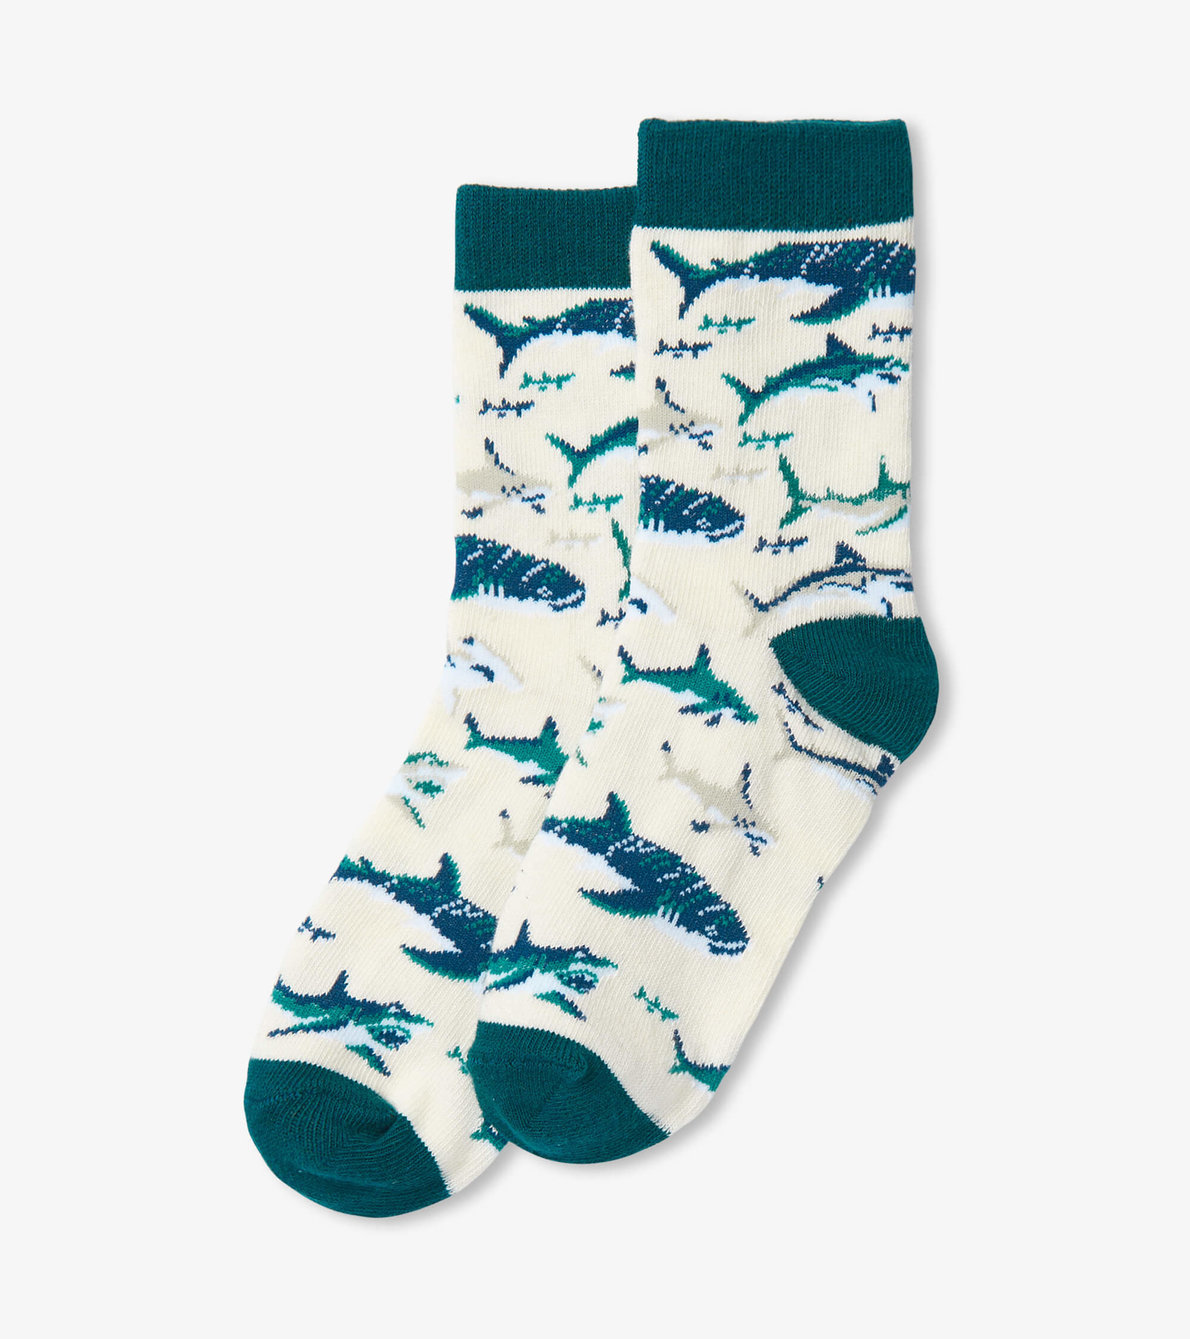 View larger image of Toothy Sharks Kids Crew Socks